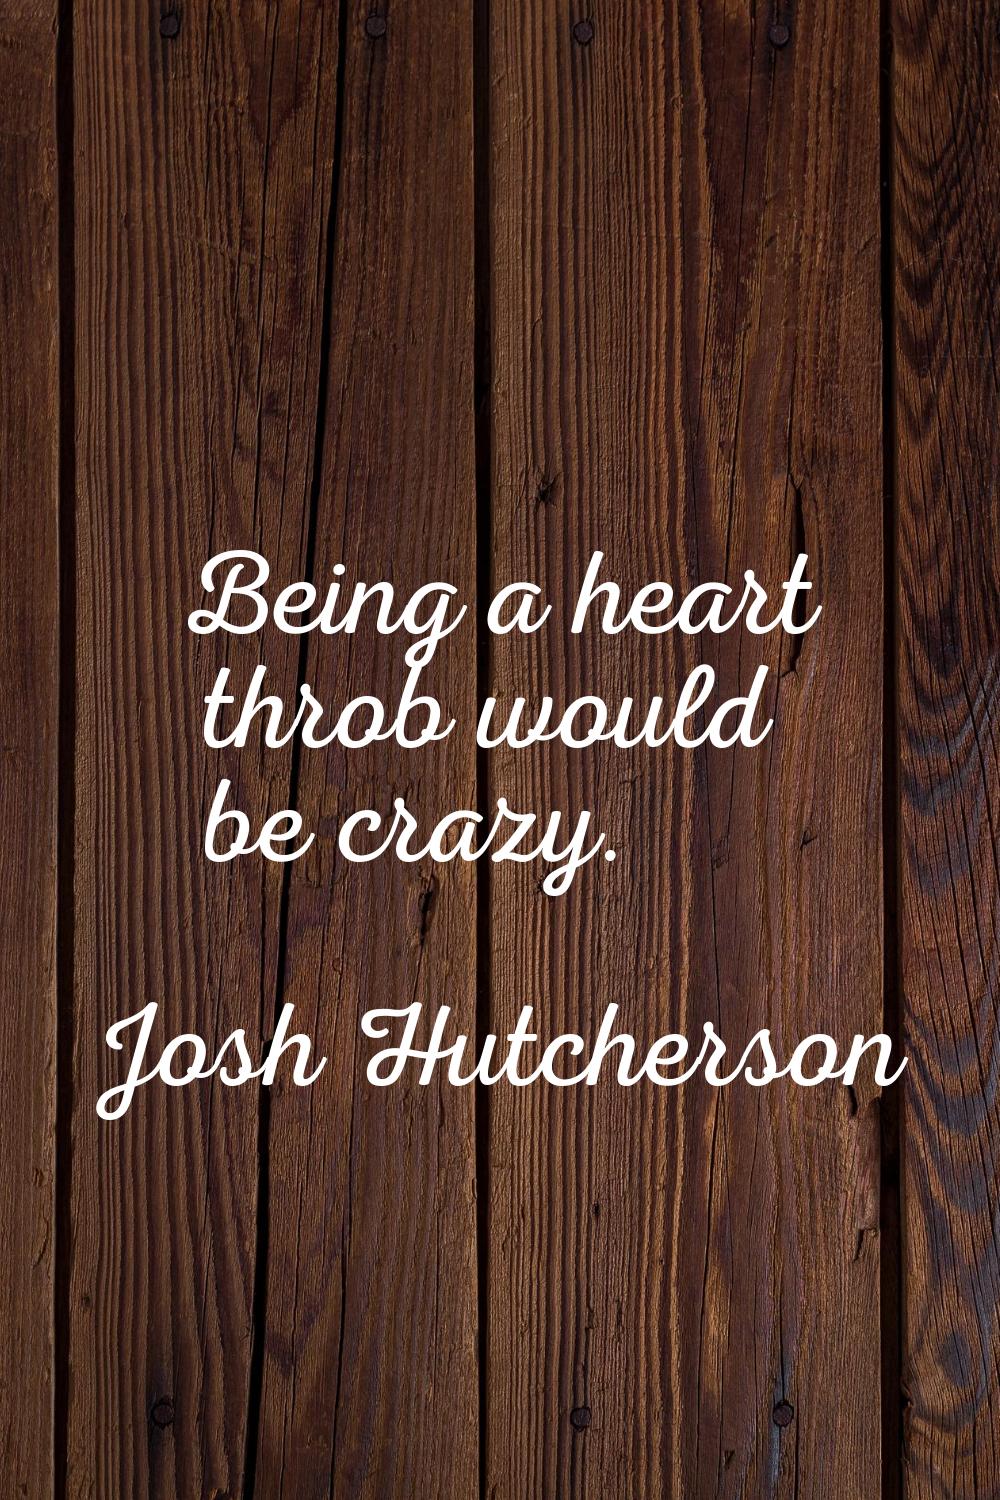 Being a heart throb would be crazy.